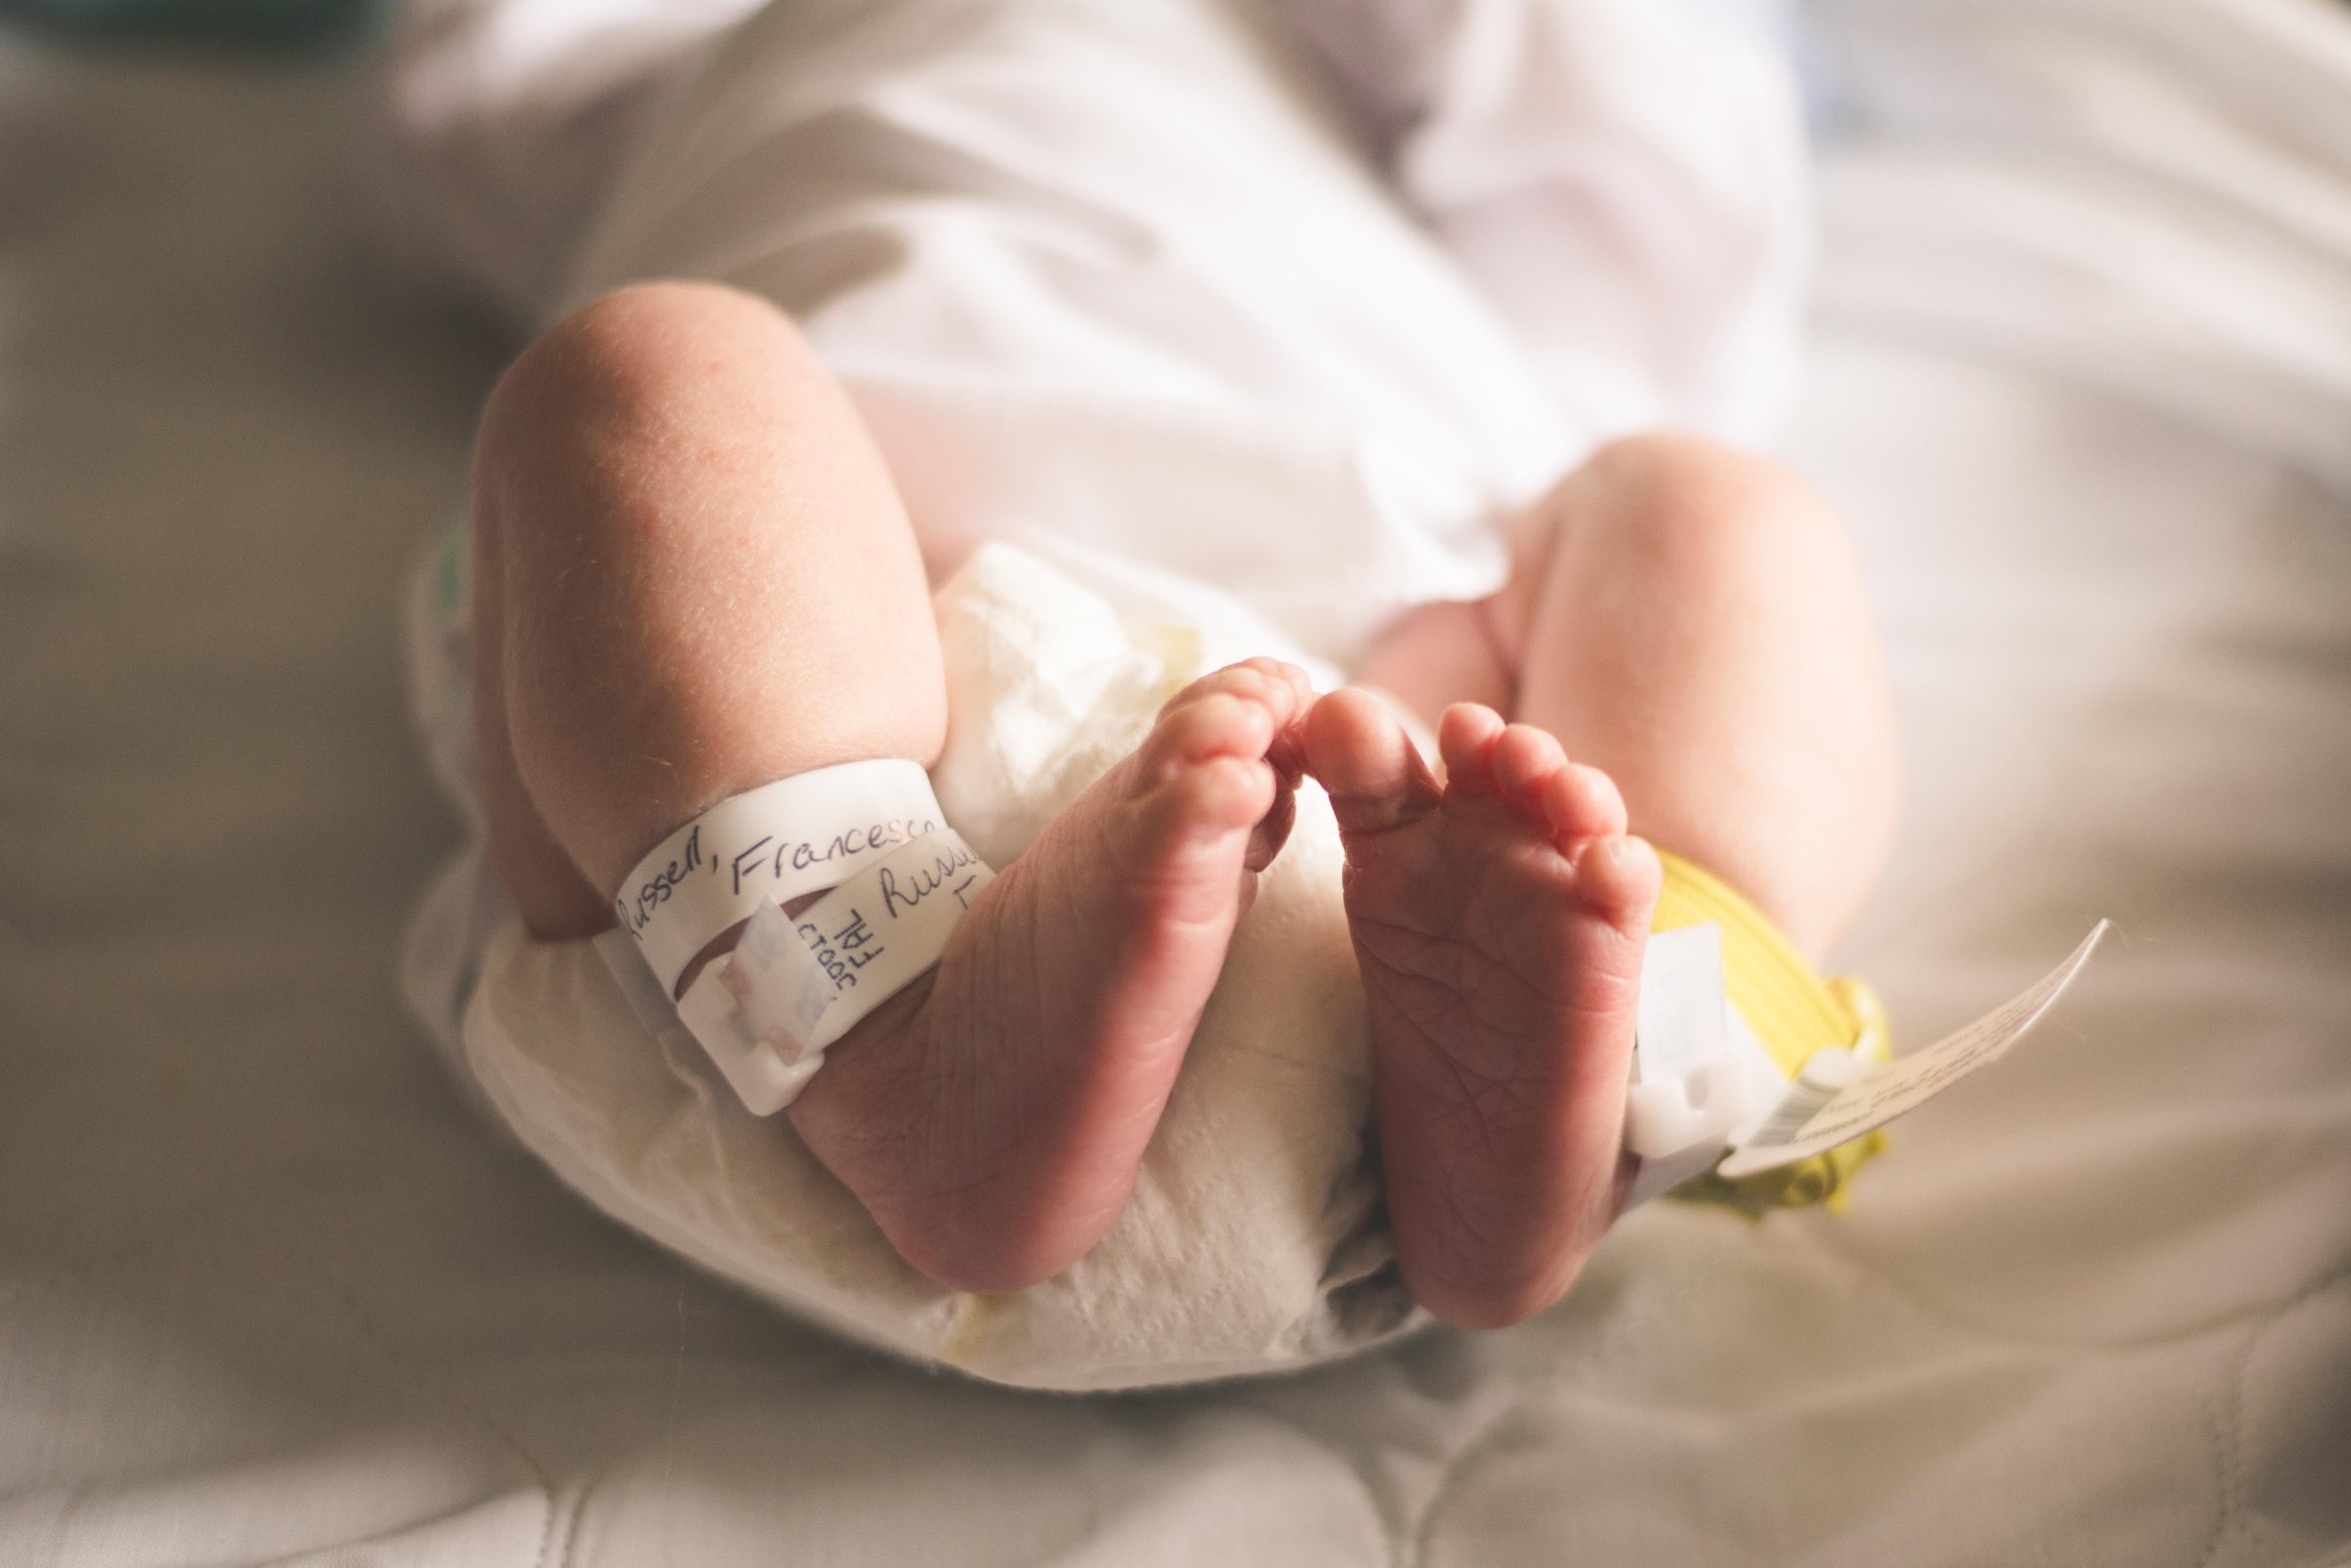 Newborn baby with tiny feet and name bracelets laying on bed in hospital